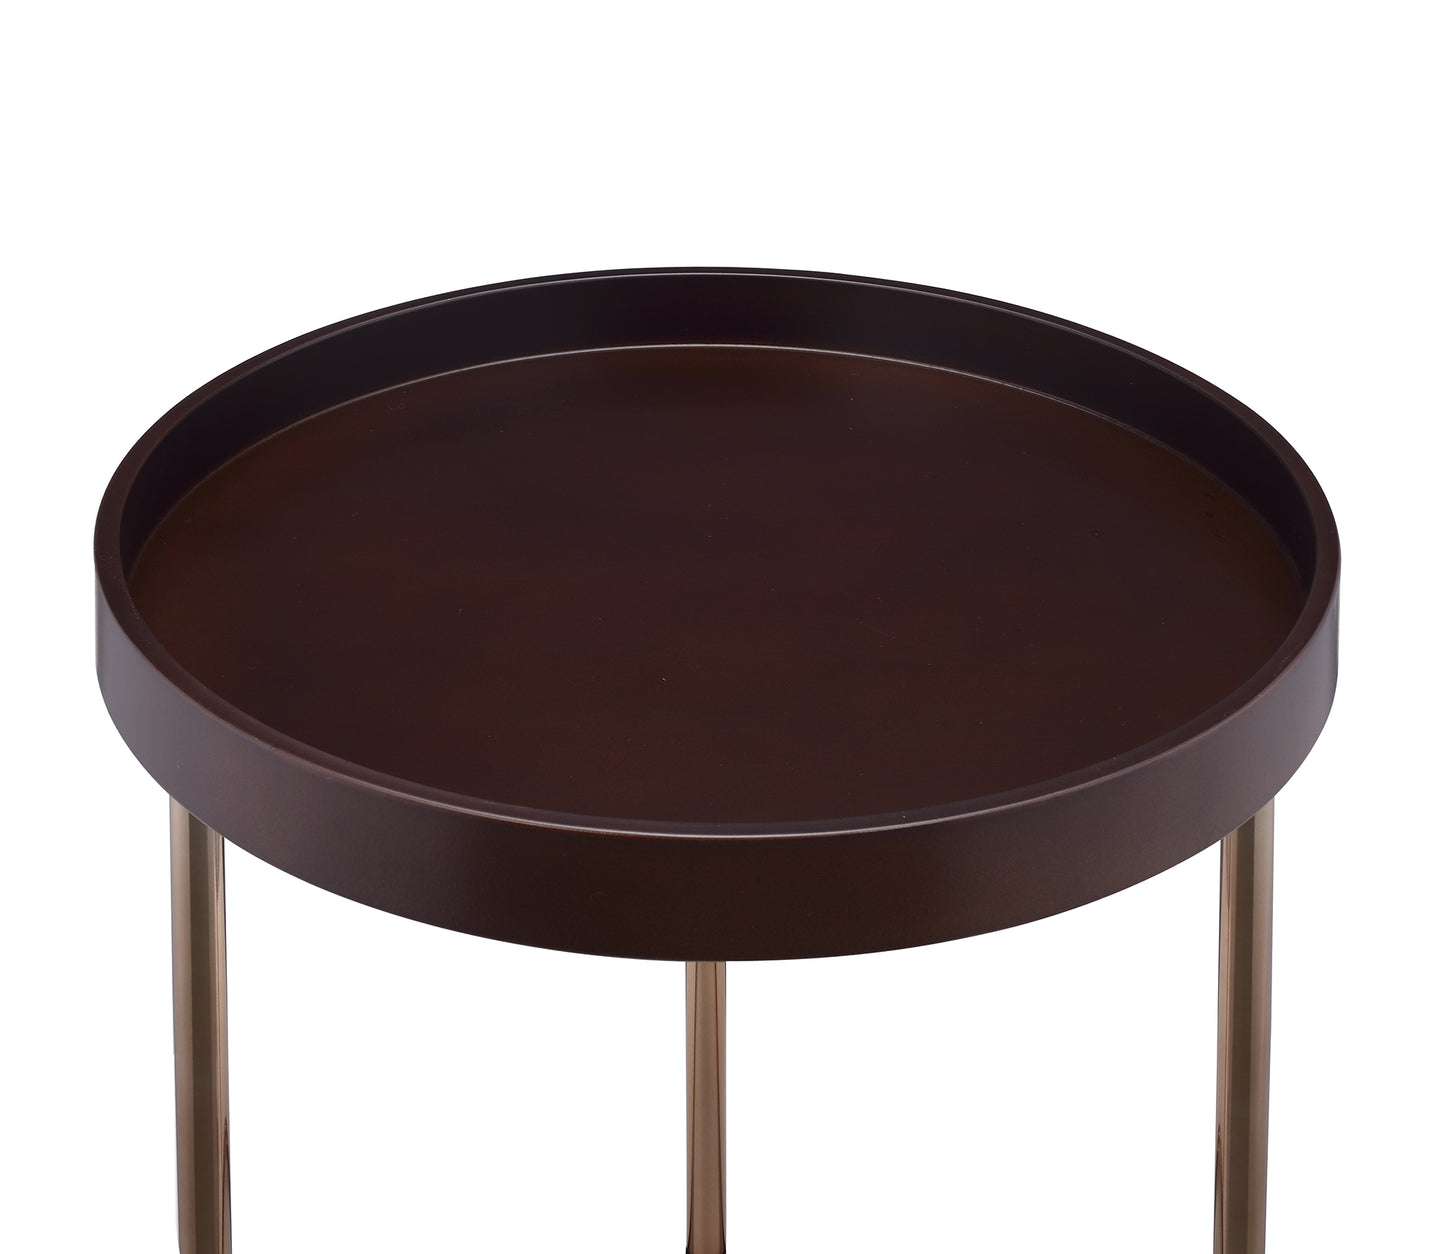 Genoa Round Tray Table with Metal Frame, Espresso